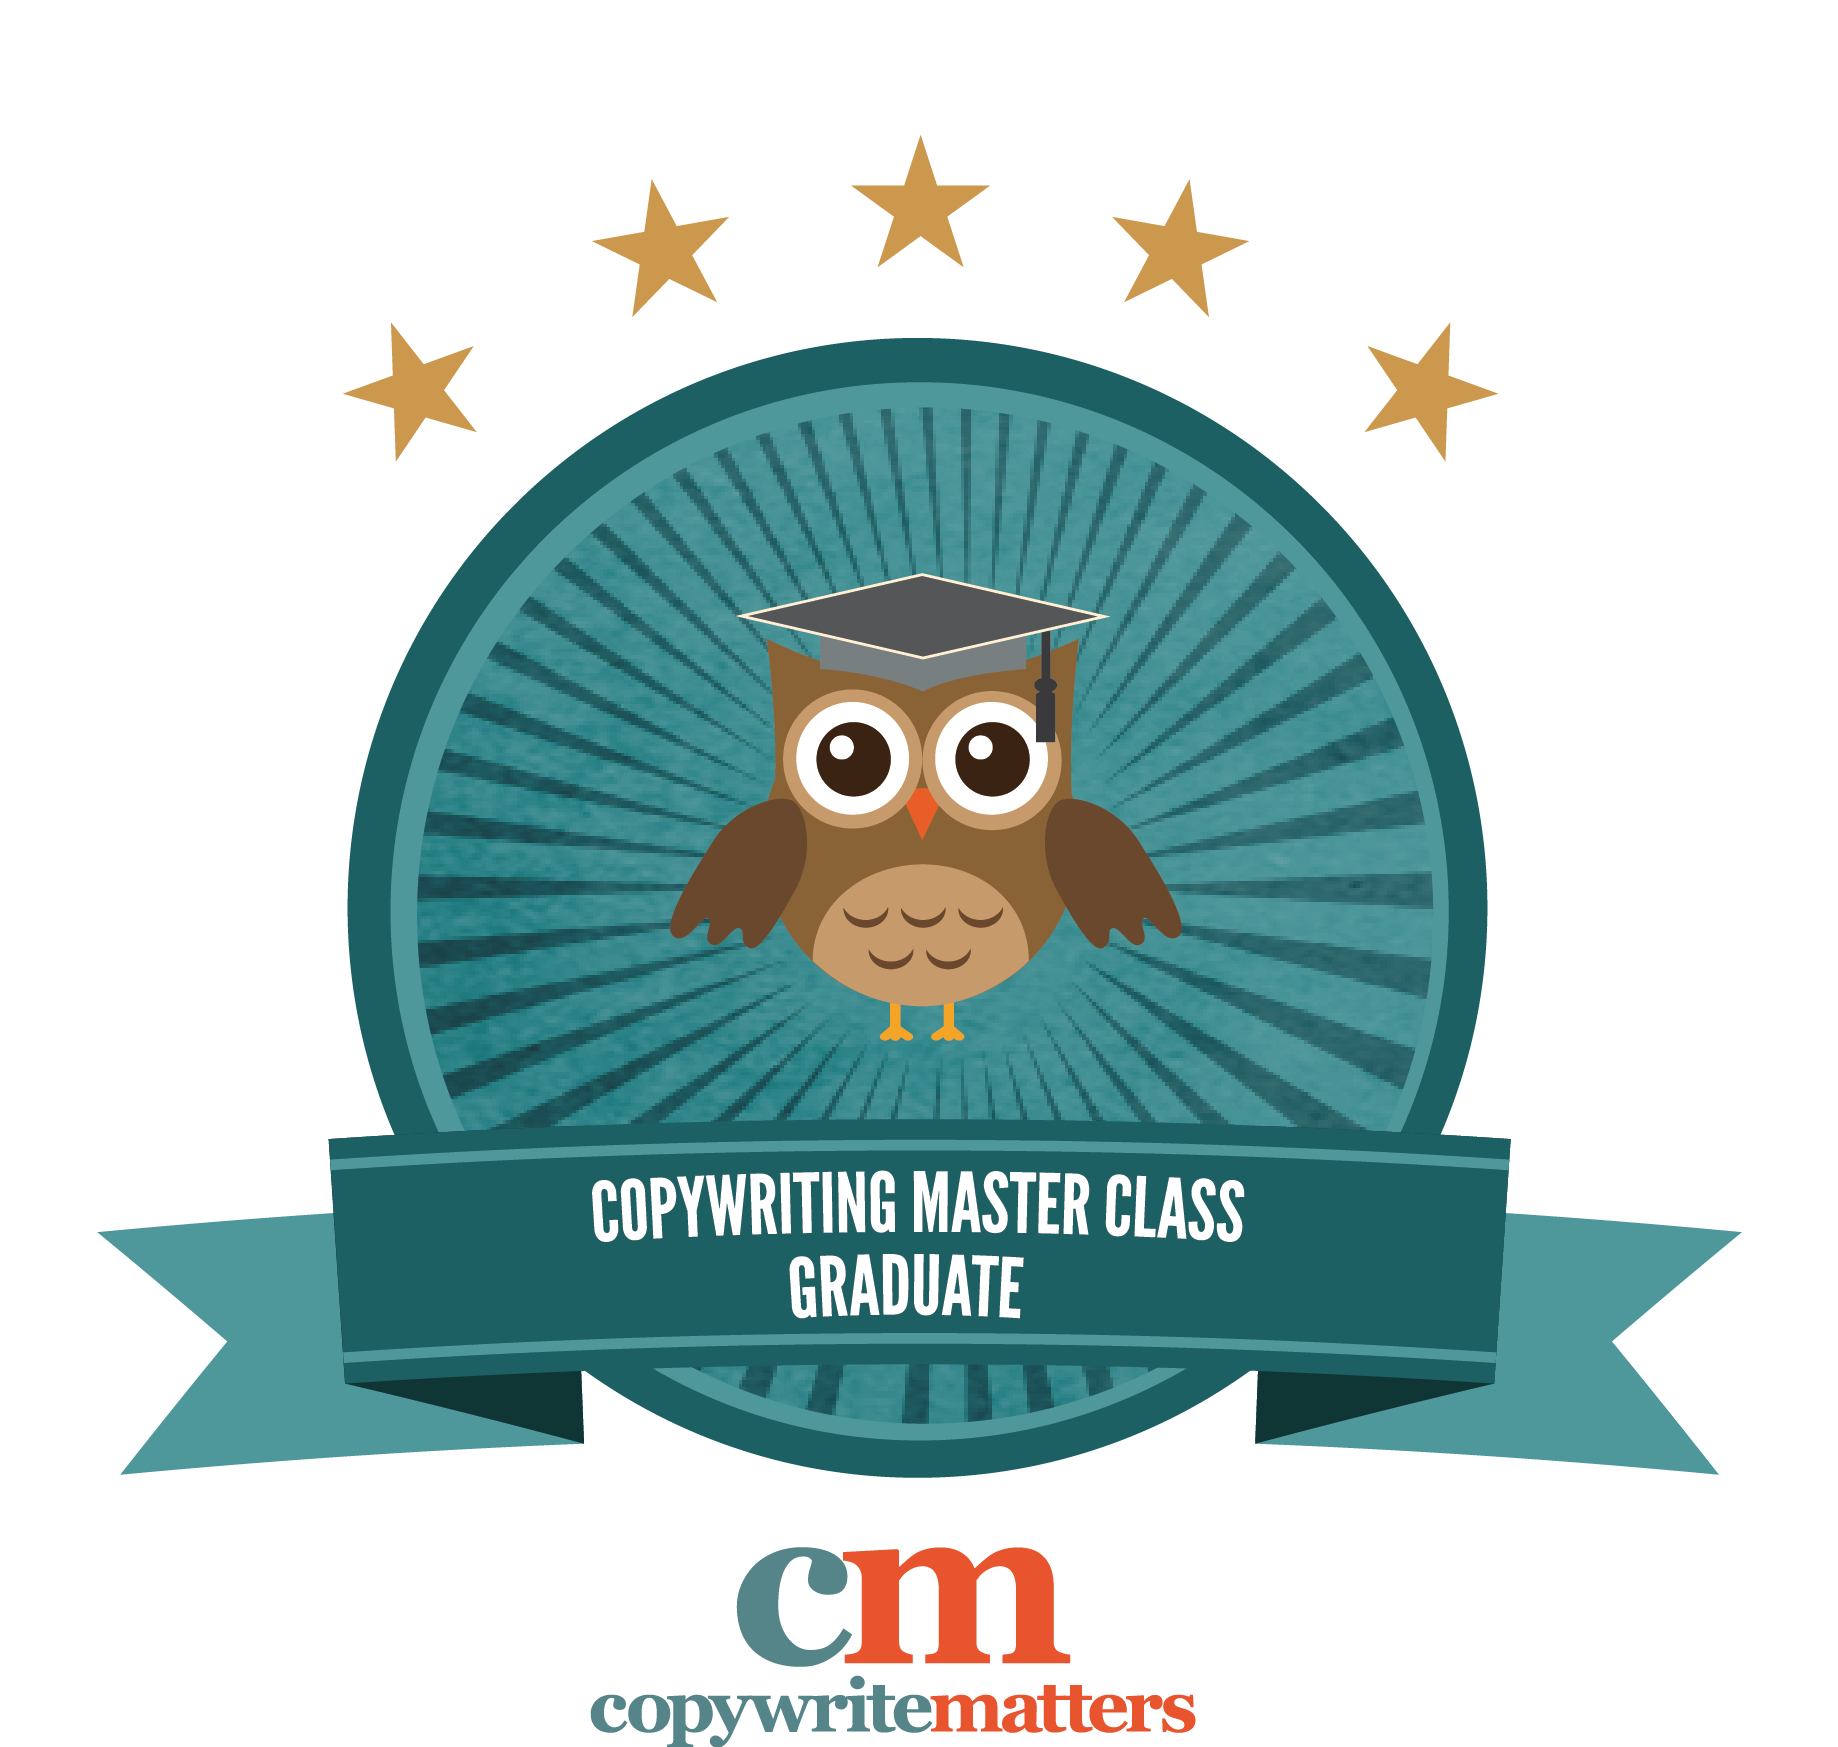 Freelance copywriter, Leeha Debnam, is a graduate of the Copywriting Master Class and this image is a badge to honour that graduation. It features a blue background with an owl wearing a graduation cap.